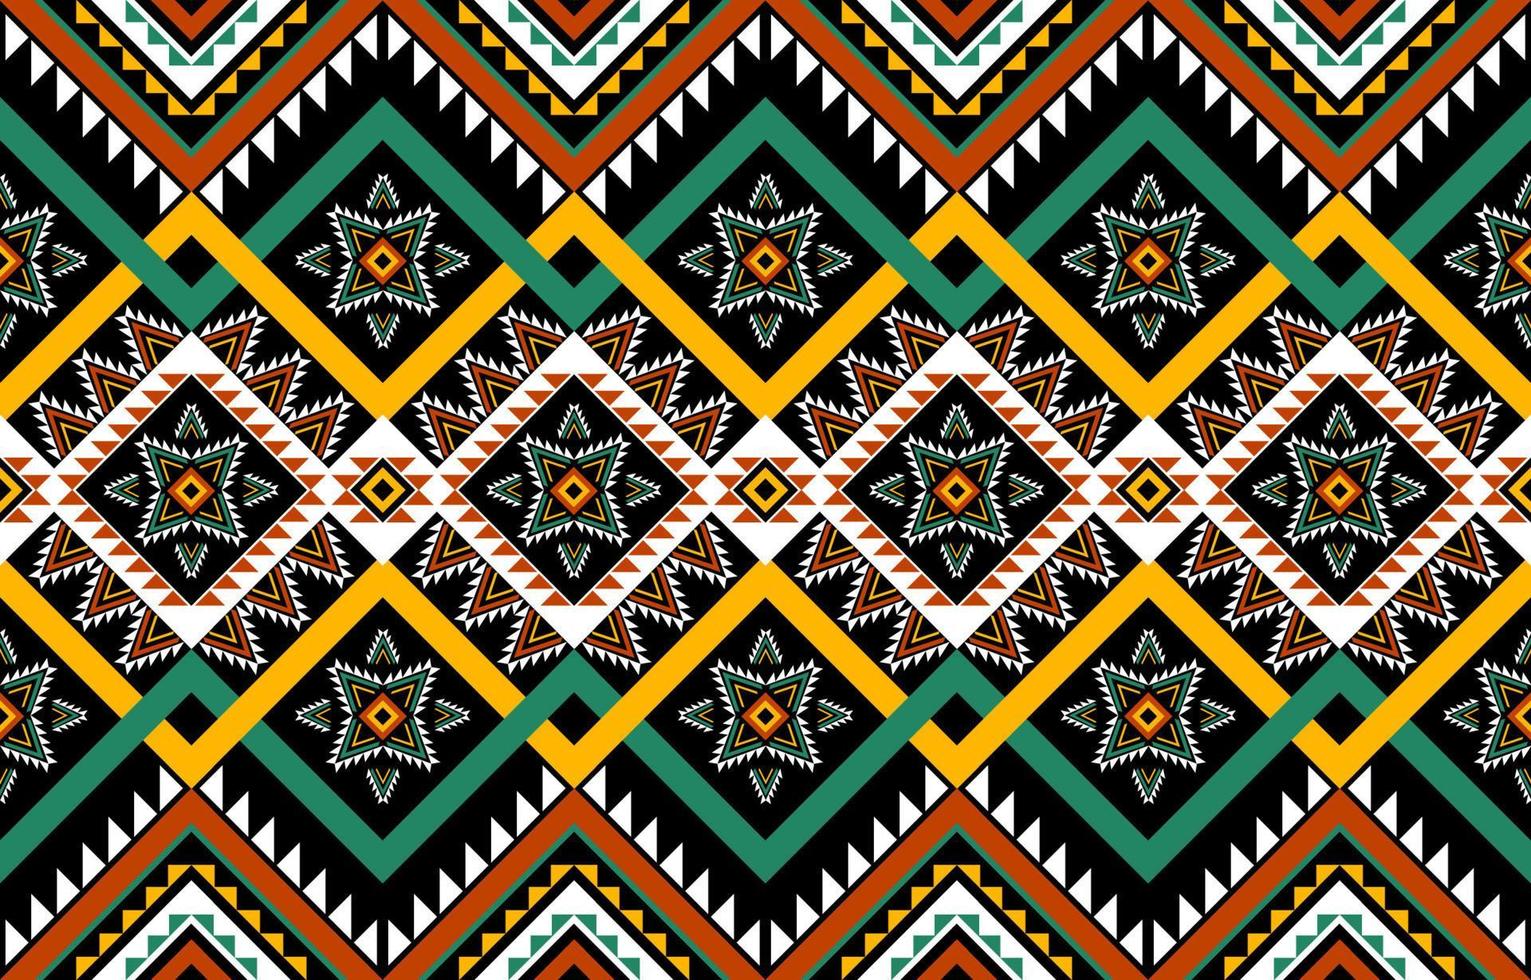 Geometric ethnic seamless pattern tribal traditional. Flower decoration. Design for background, illustration, wallpaper, fabric, texture, batik, carpet, clothing, embroidery vector